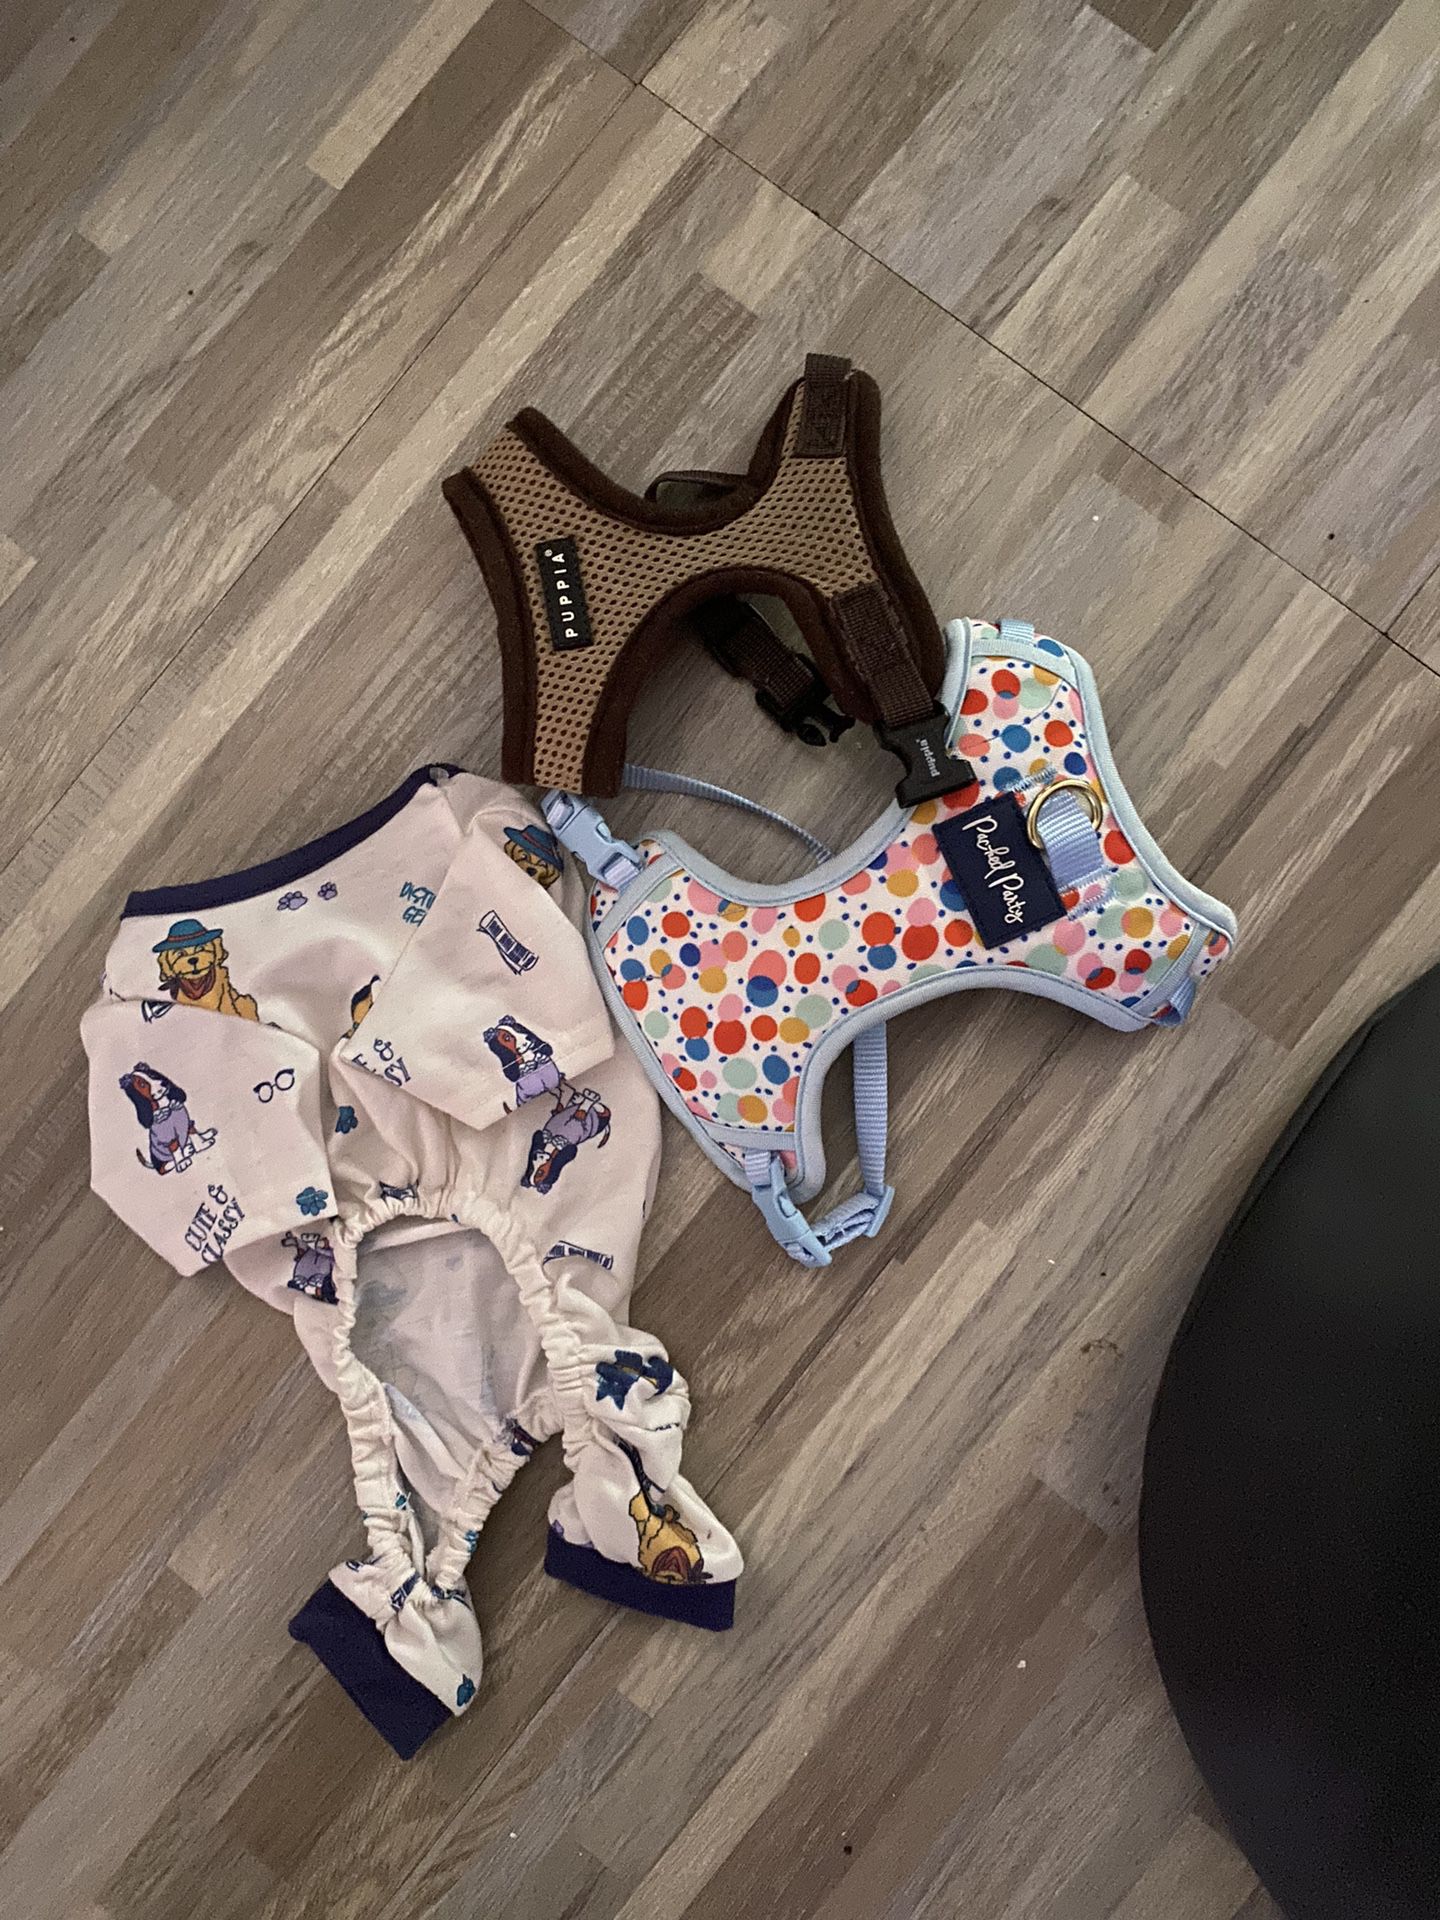 Xsmall And Small Dog Harness’s And Small Pajamas 